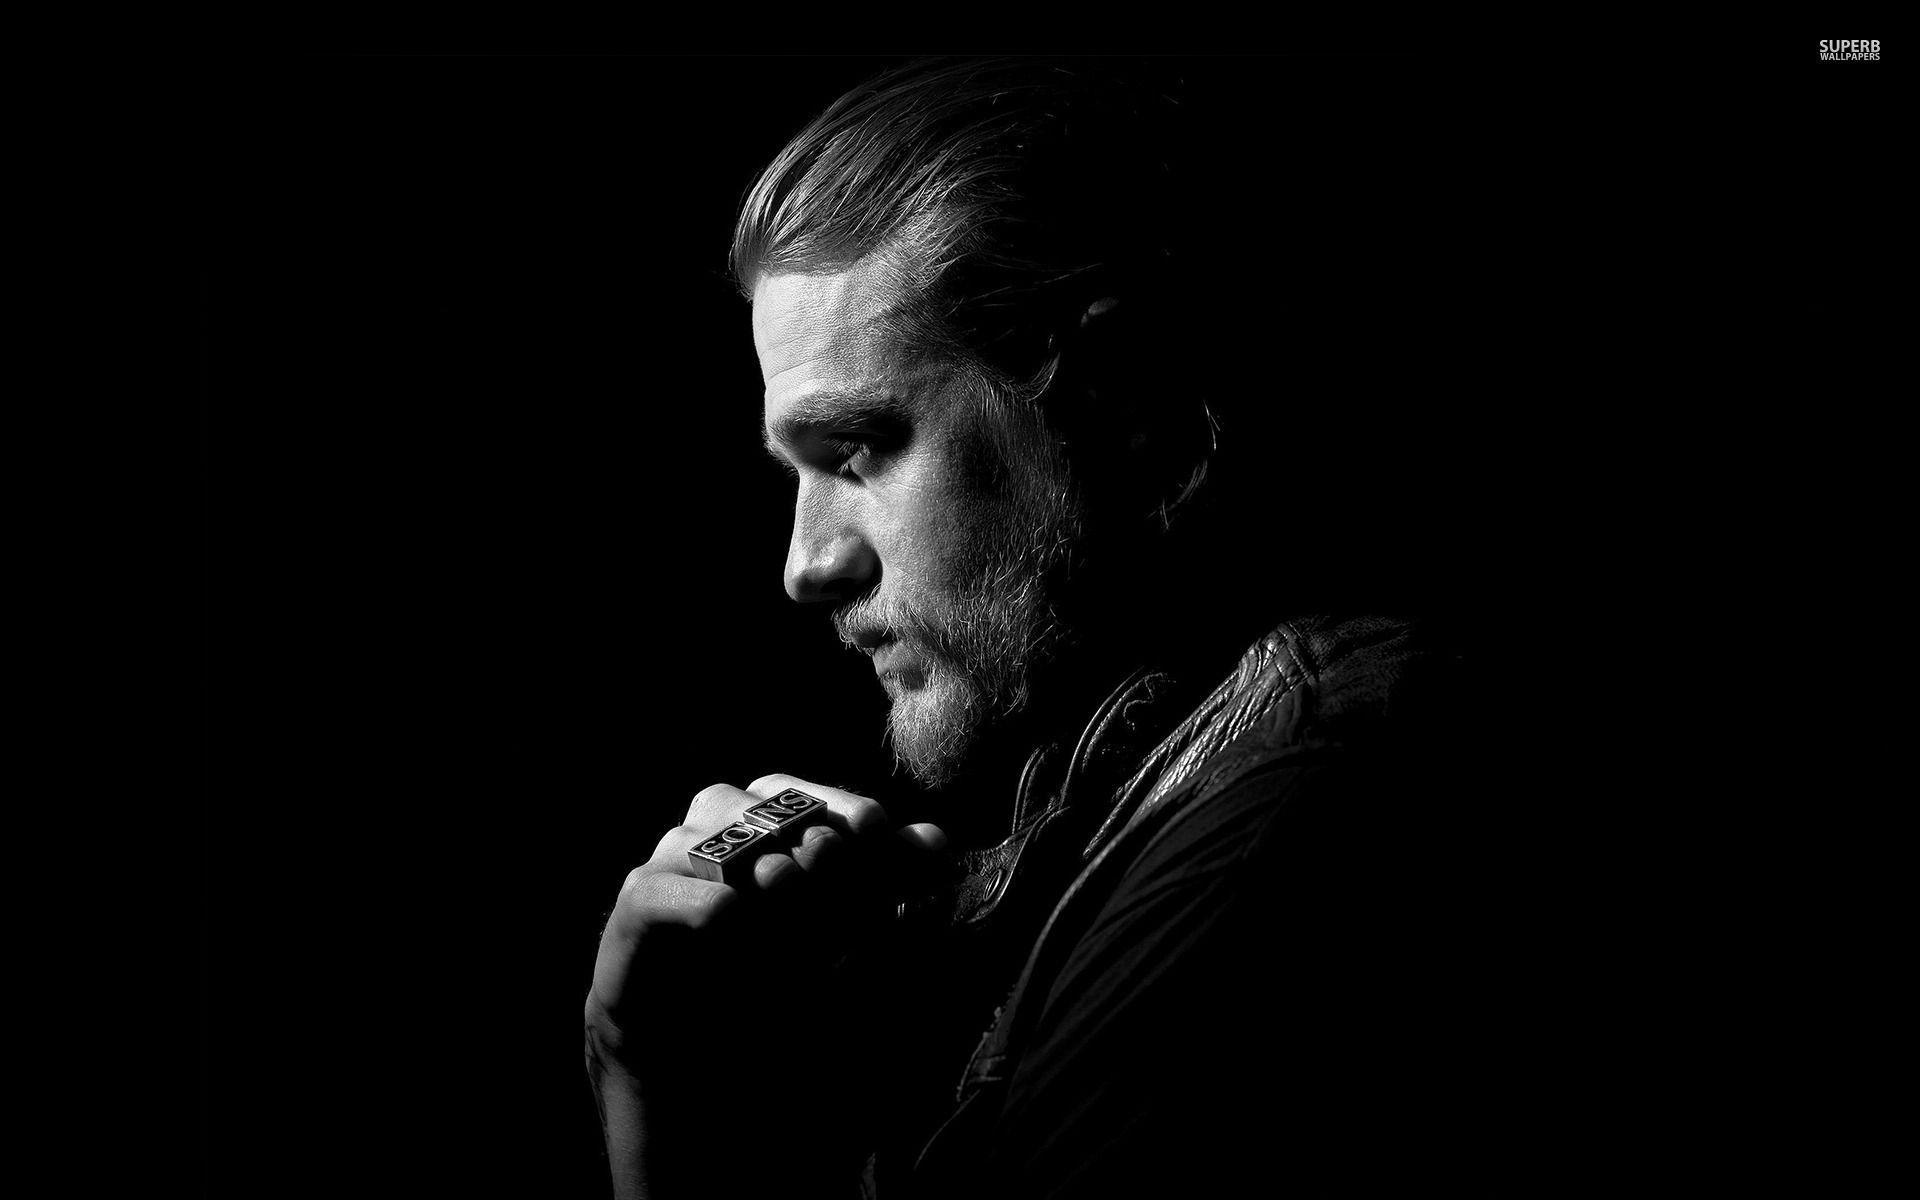 Sons Of Anarchy Wallpaper 4K : Sons Of Anarchy, Monochrome HD